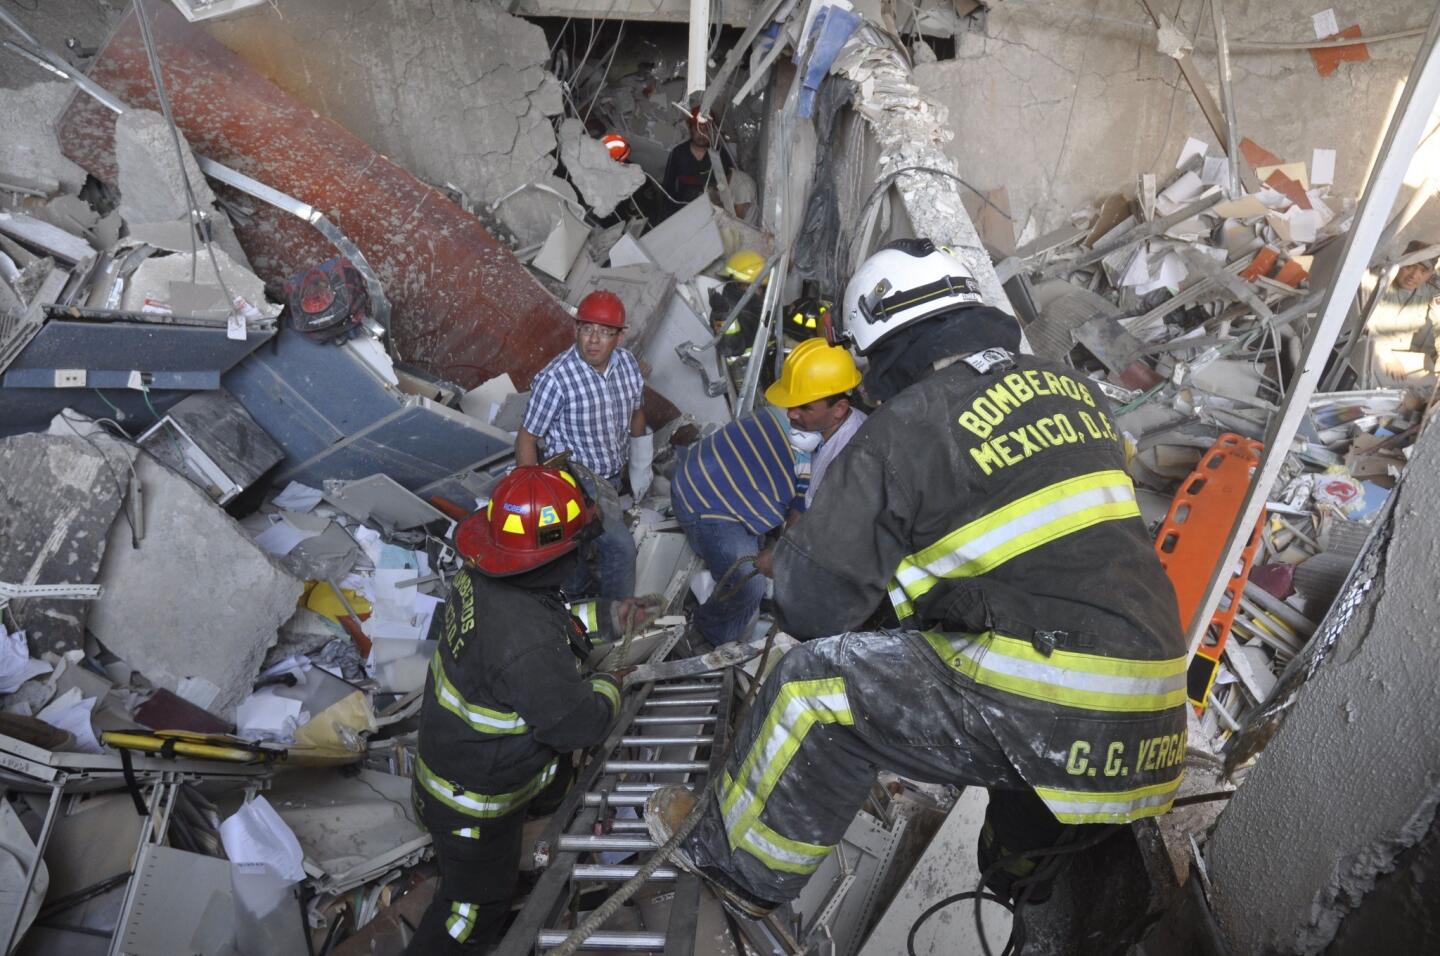 Firefighters and workers dig for survivors after an explosion next to the executive tower in the headquarters complex of Pemex, Mexico's state-owned oil company,in Mexico City.